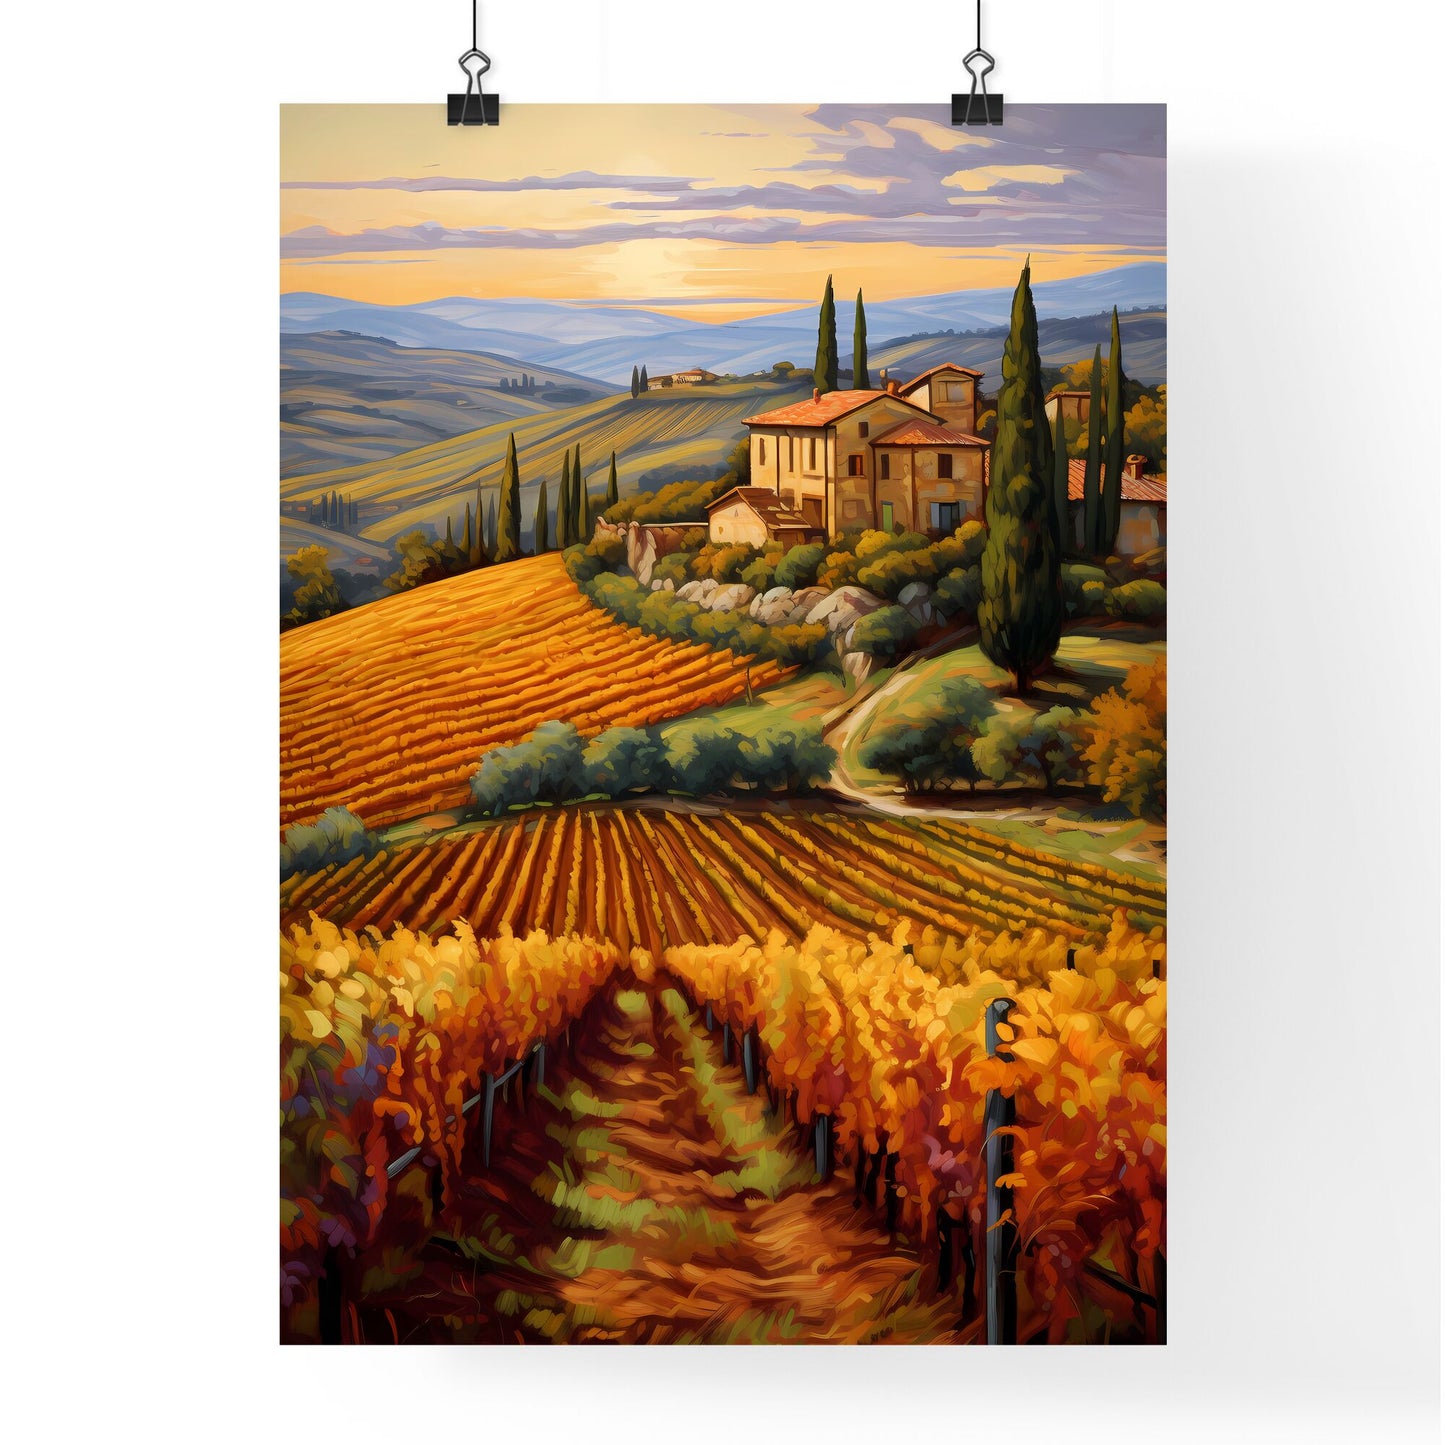 Painting Of A House On A Hill With Rows Of Vines Art Print Default Title